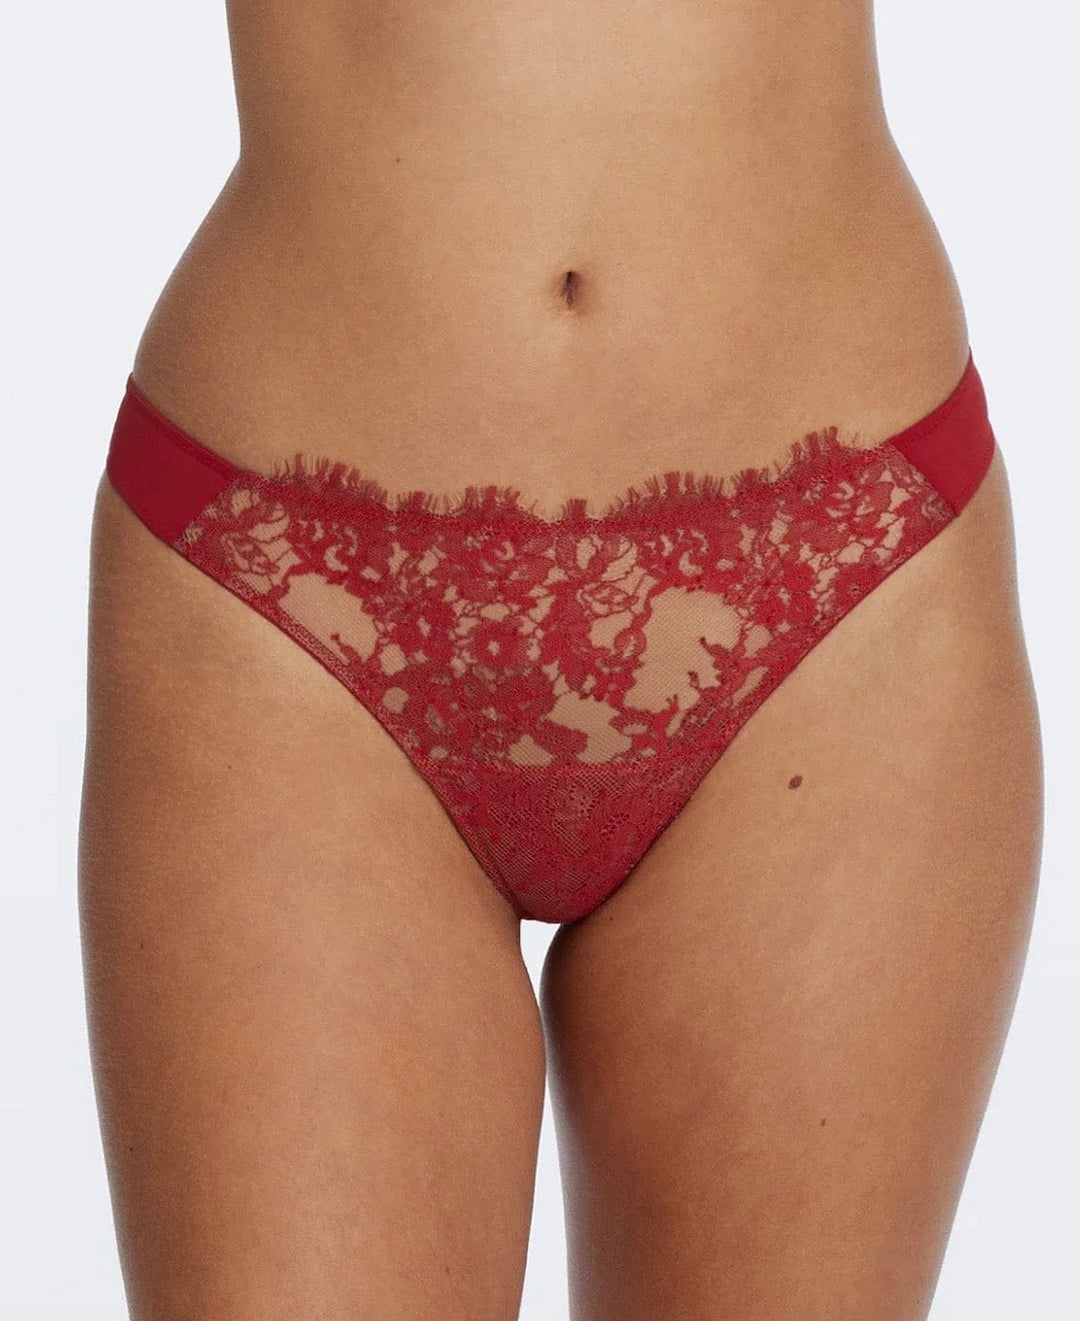 NATIVE INTIMATES THONG PANTY COLOR RUMBA RED SIZE SMALL NWT